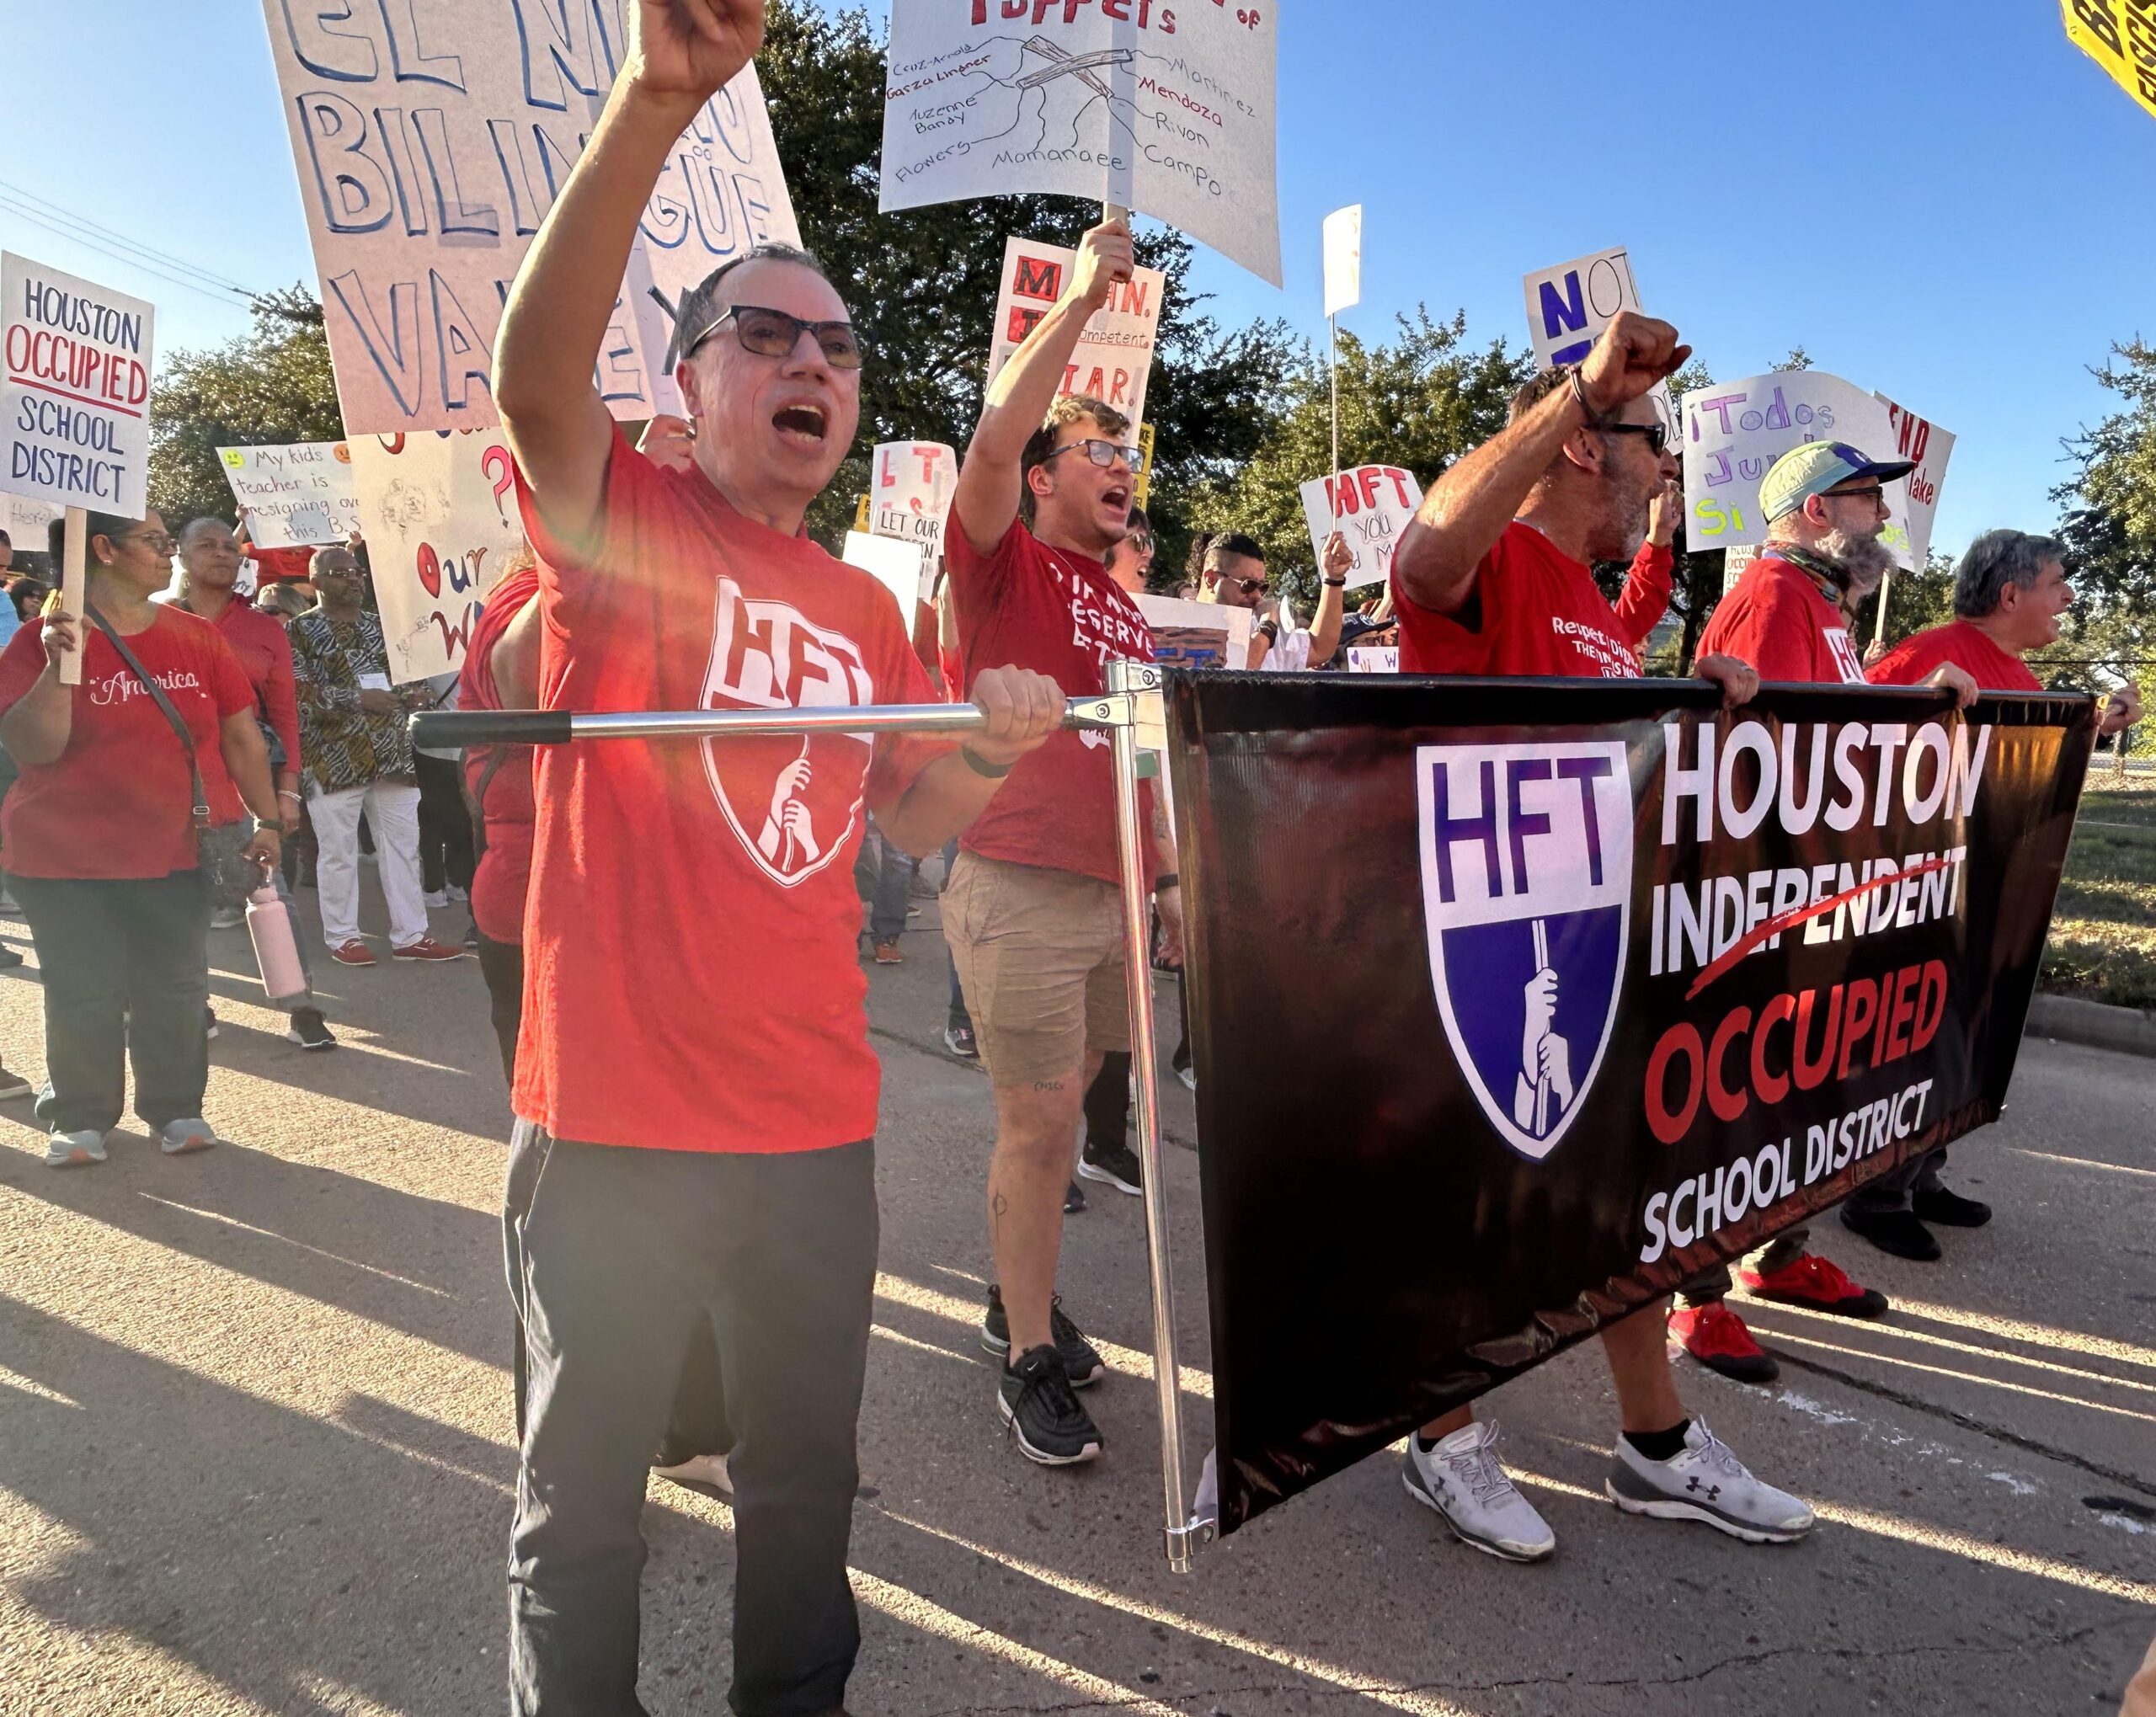 Men in red t-shirts march at the head of a crowd with their fists upraised. They are holding a Houston teachers union banner.